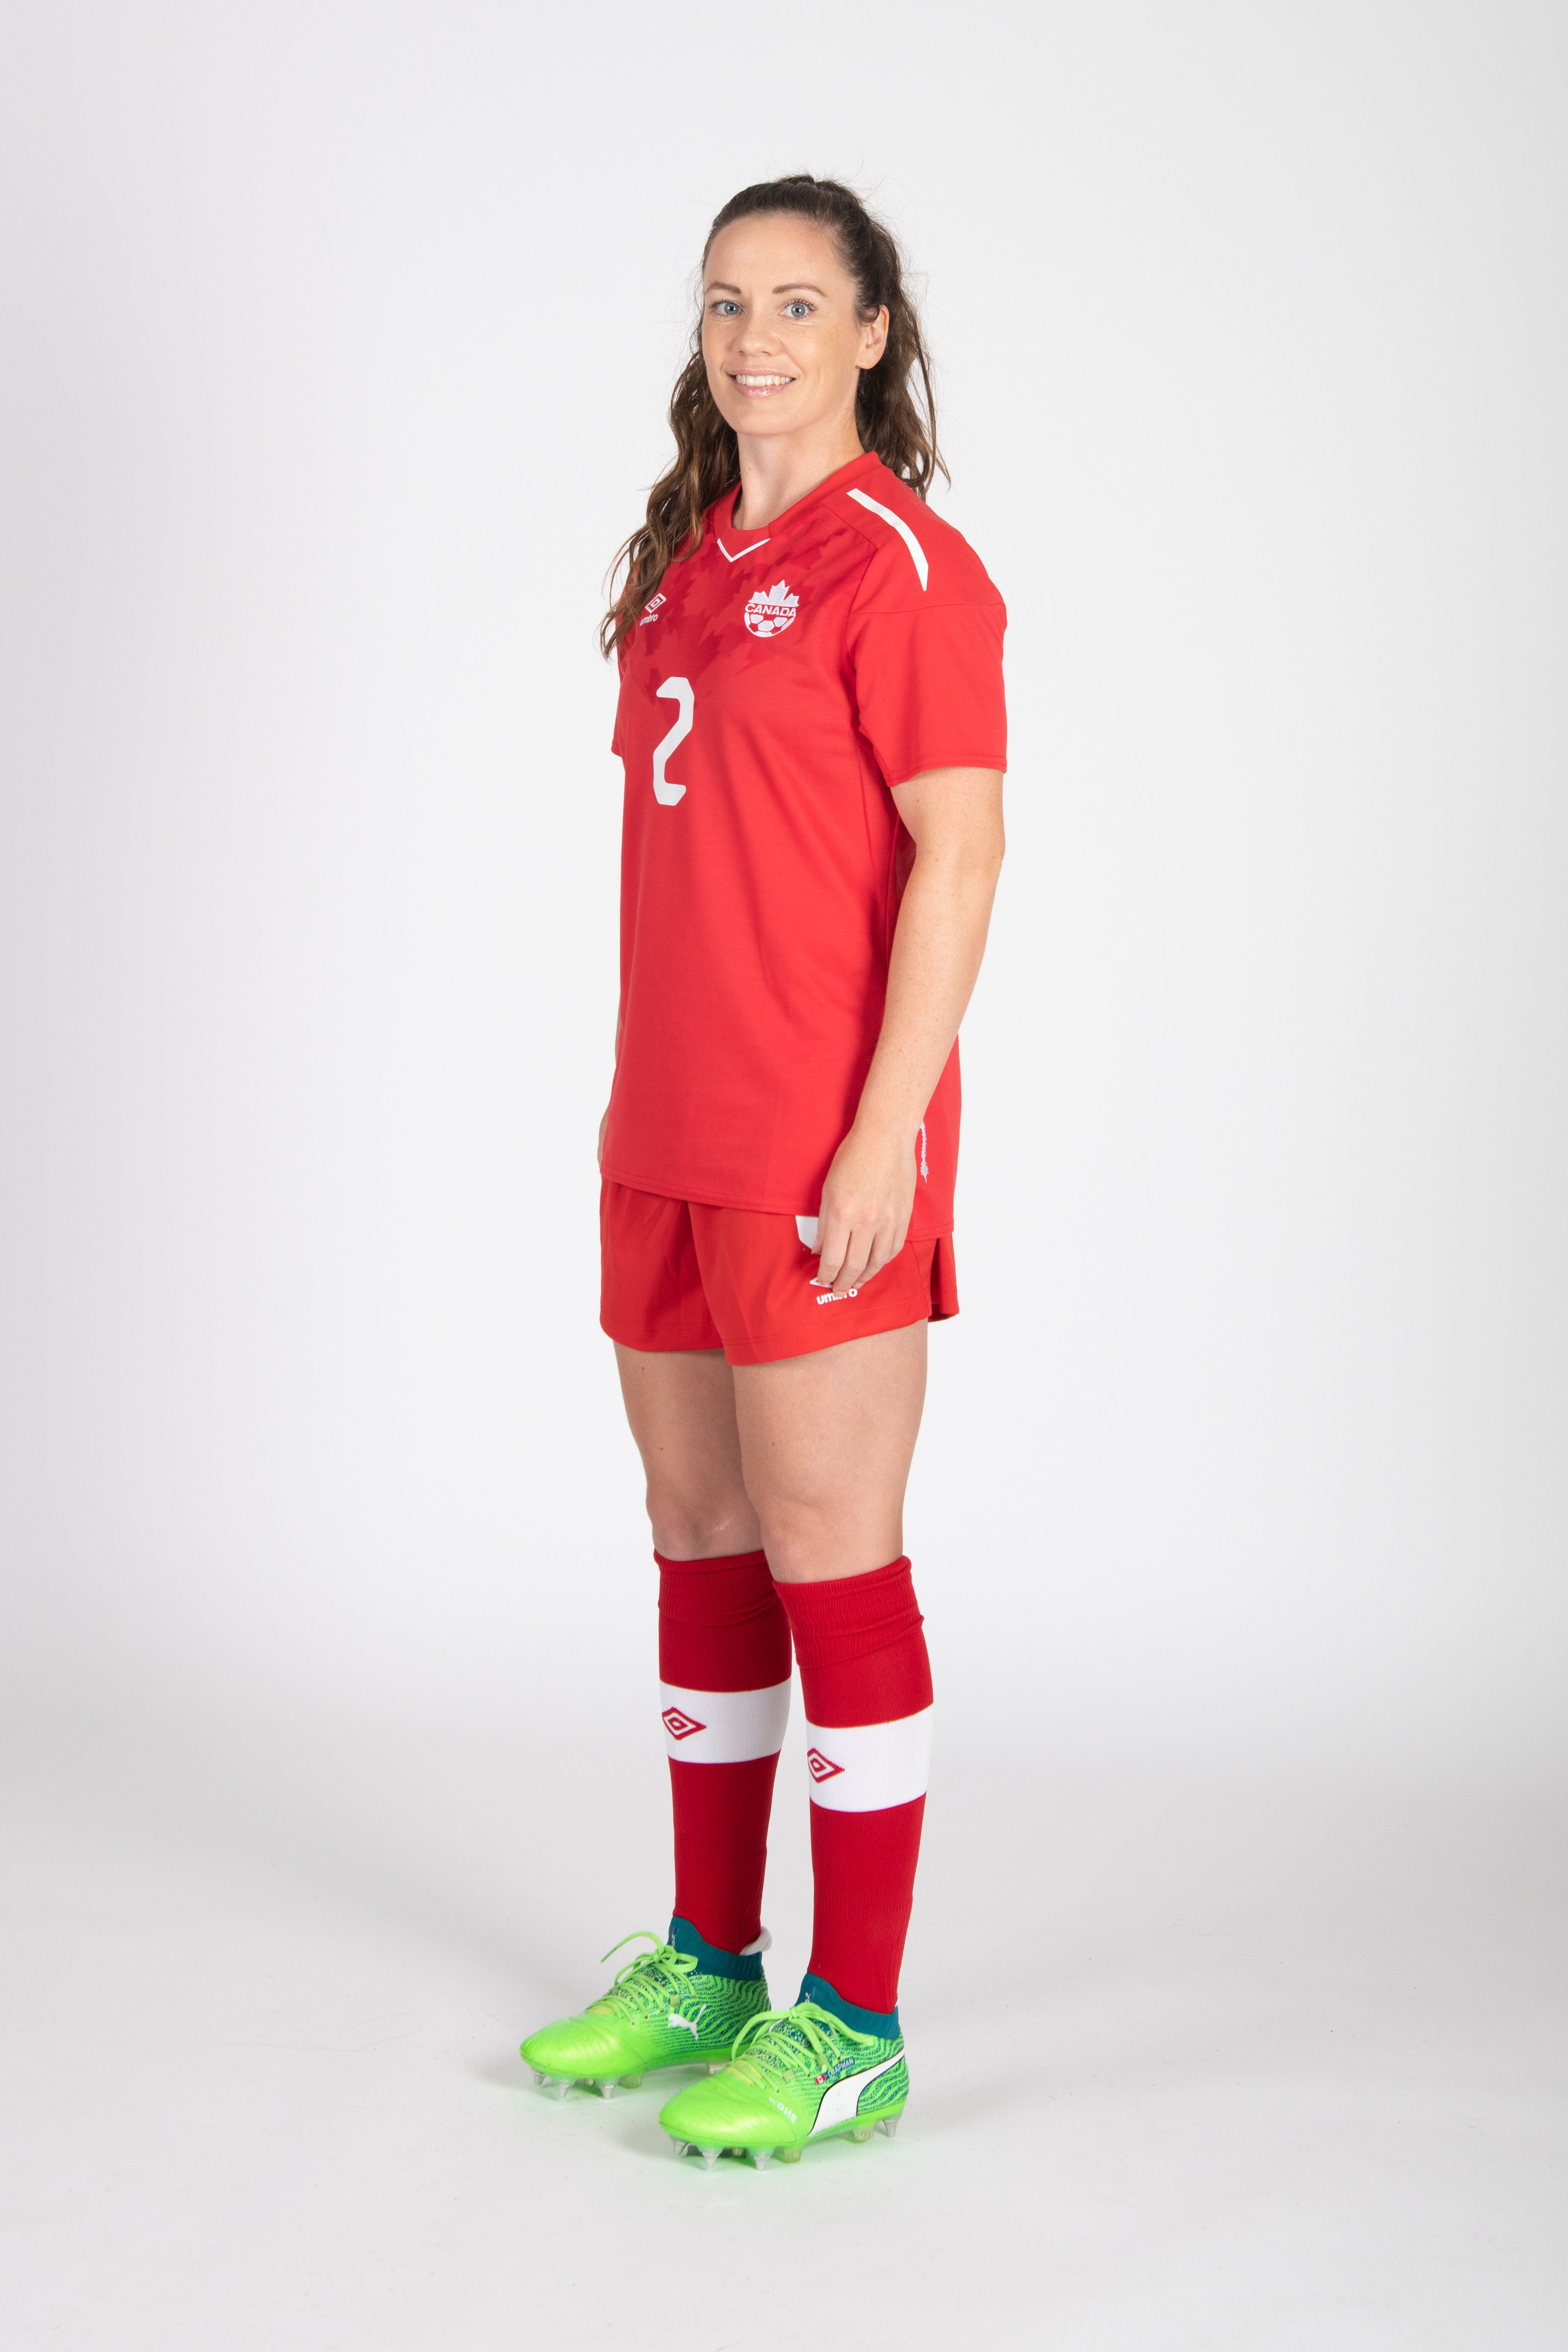 20180604_CANWNT_Chapman_byBazyl32